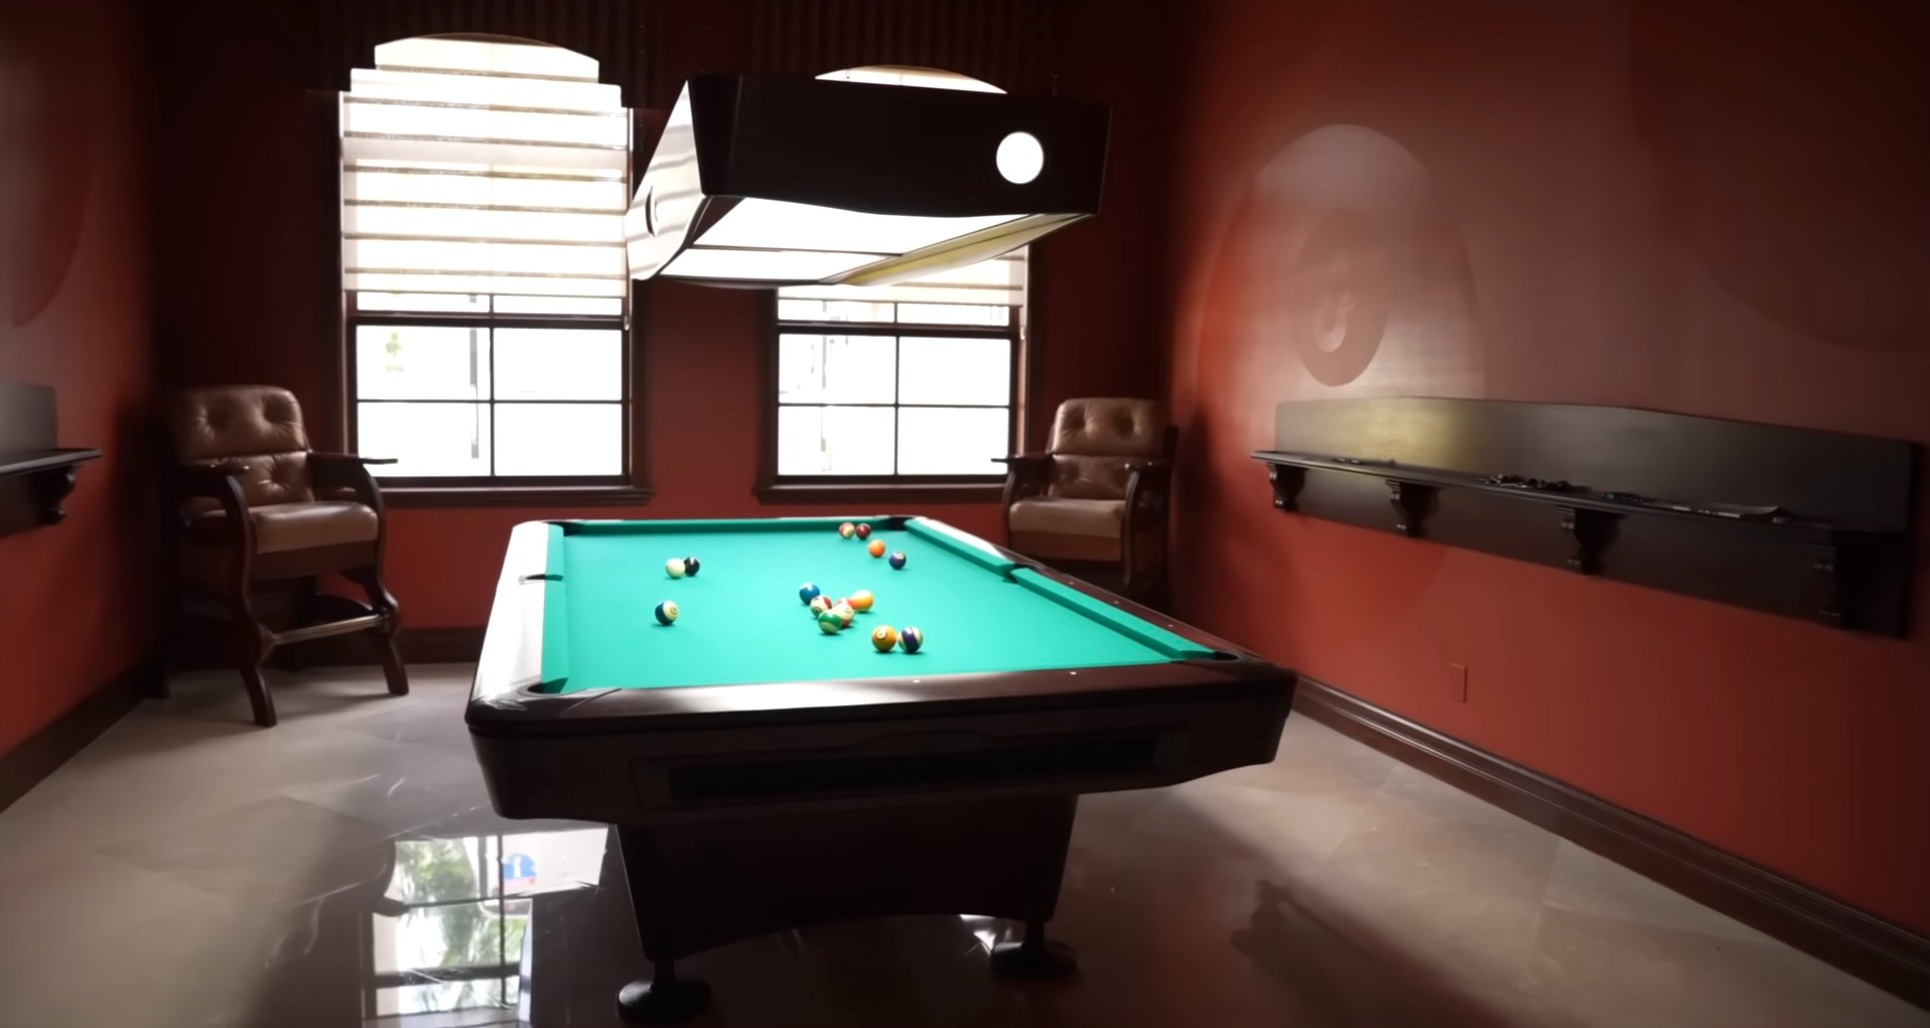 Hill's home features a games room with a pool table